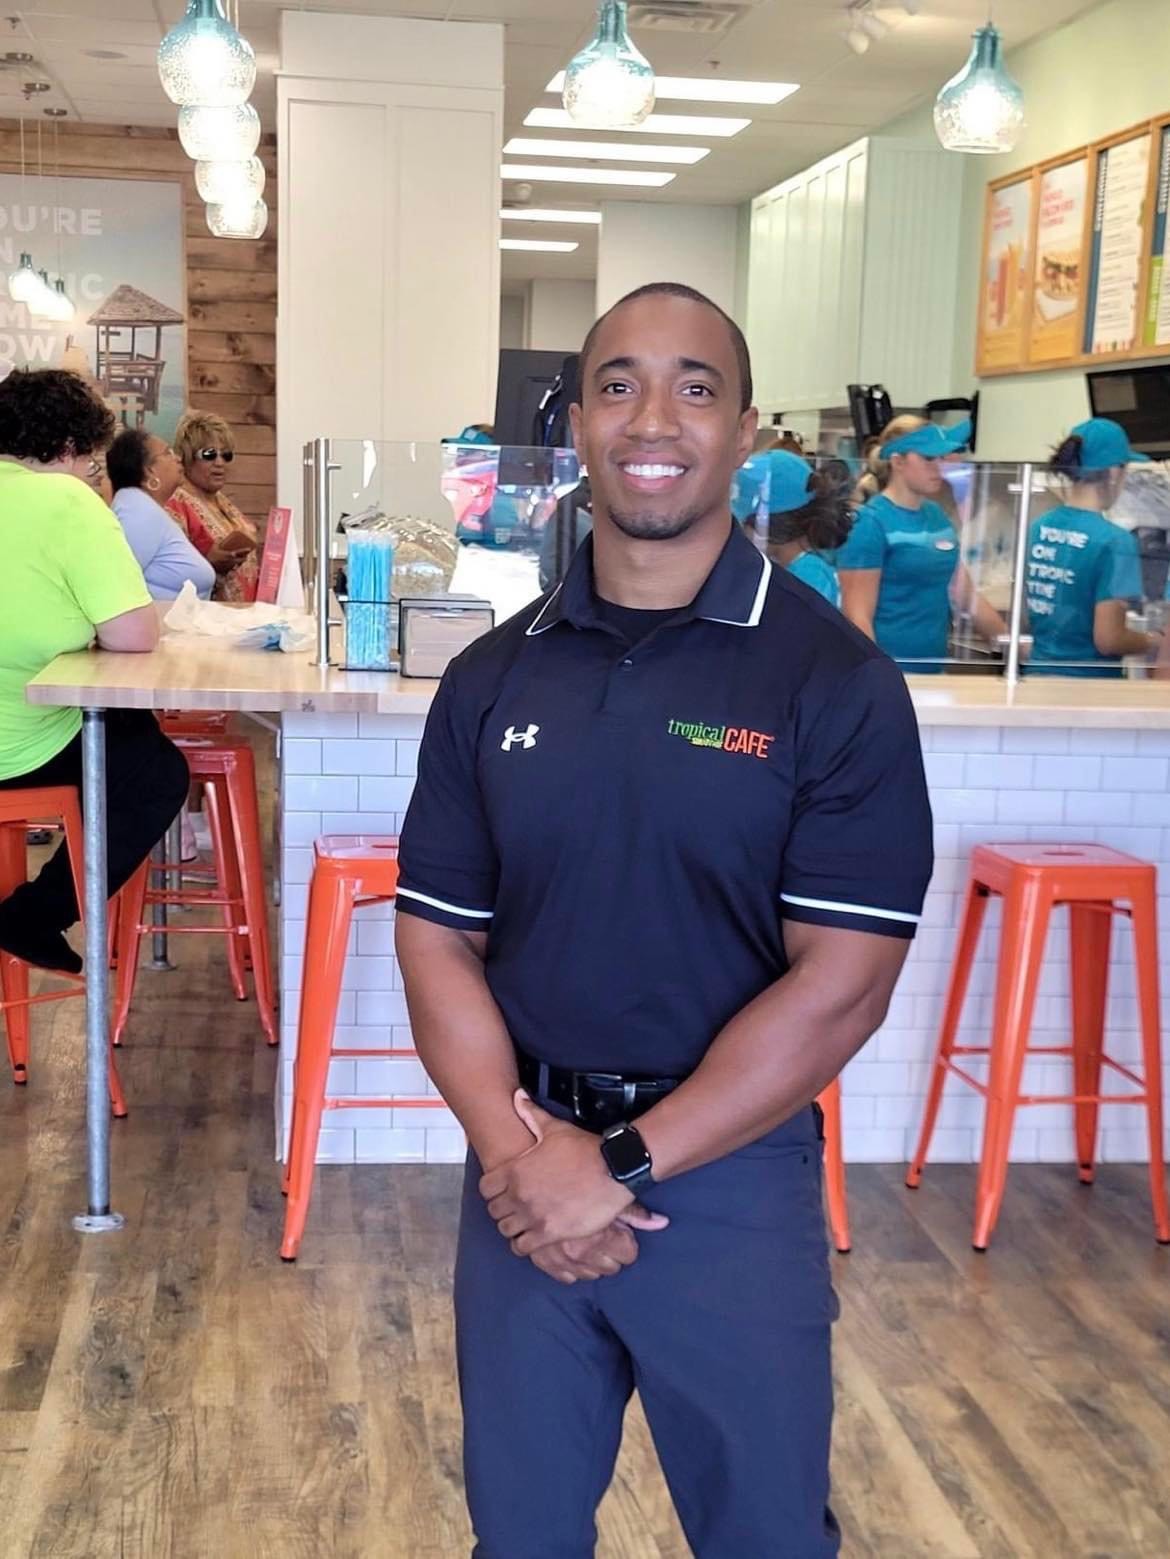 Service and Dedication to His Community Leads to a Delicious New Business